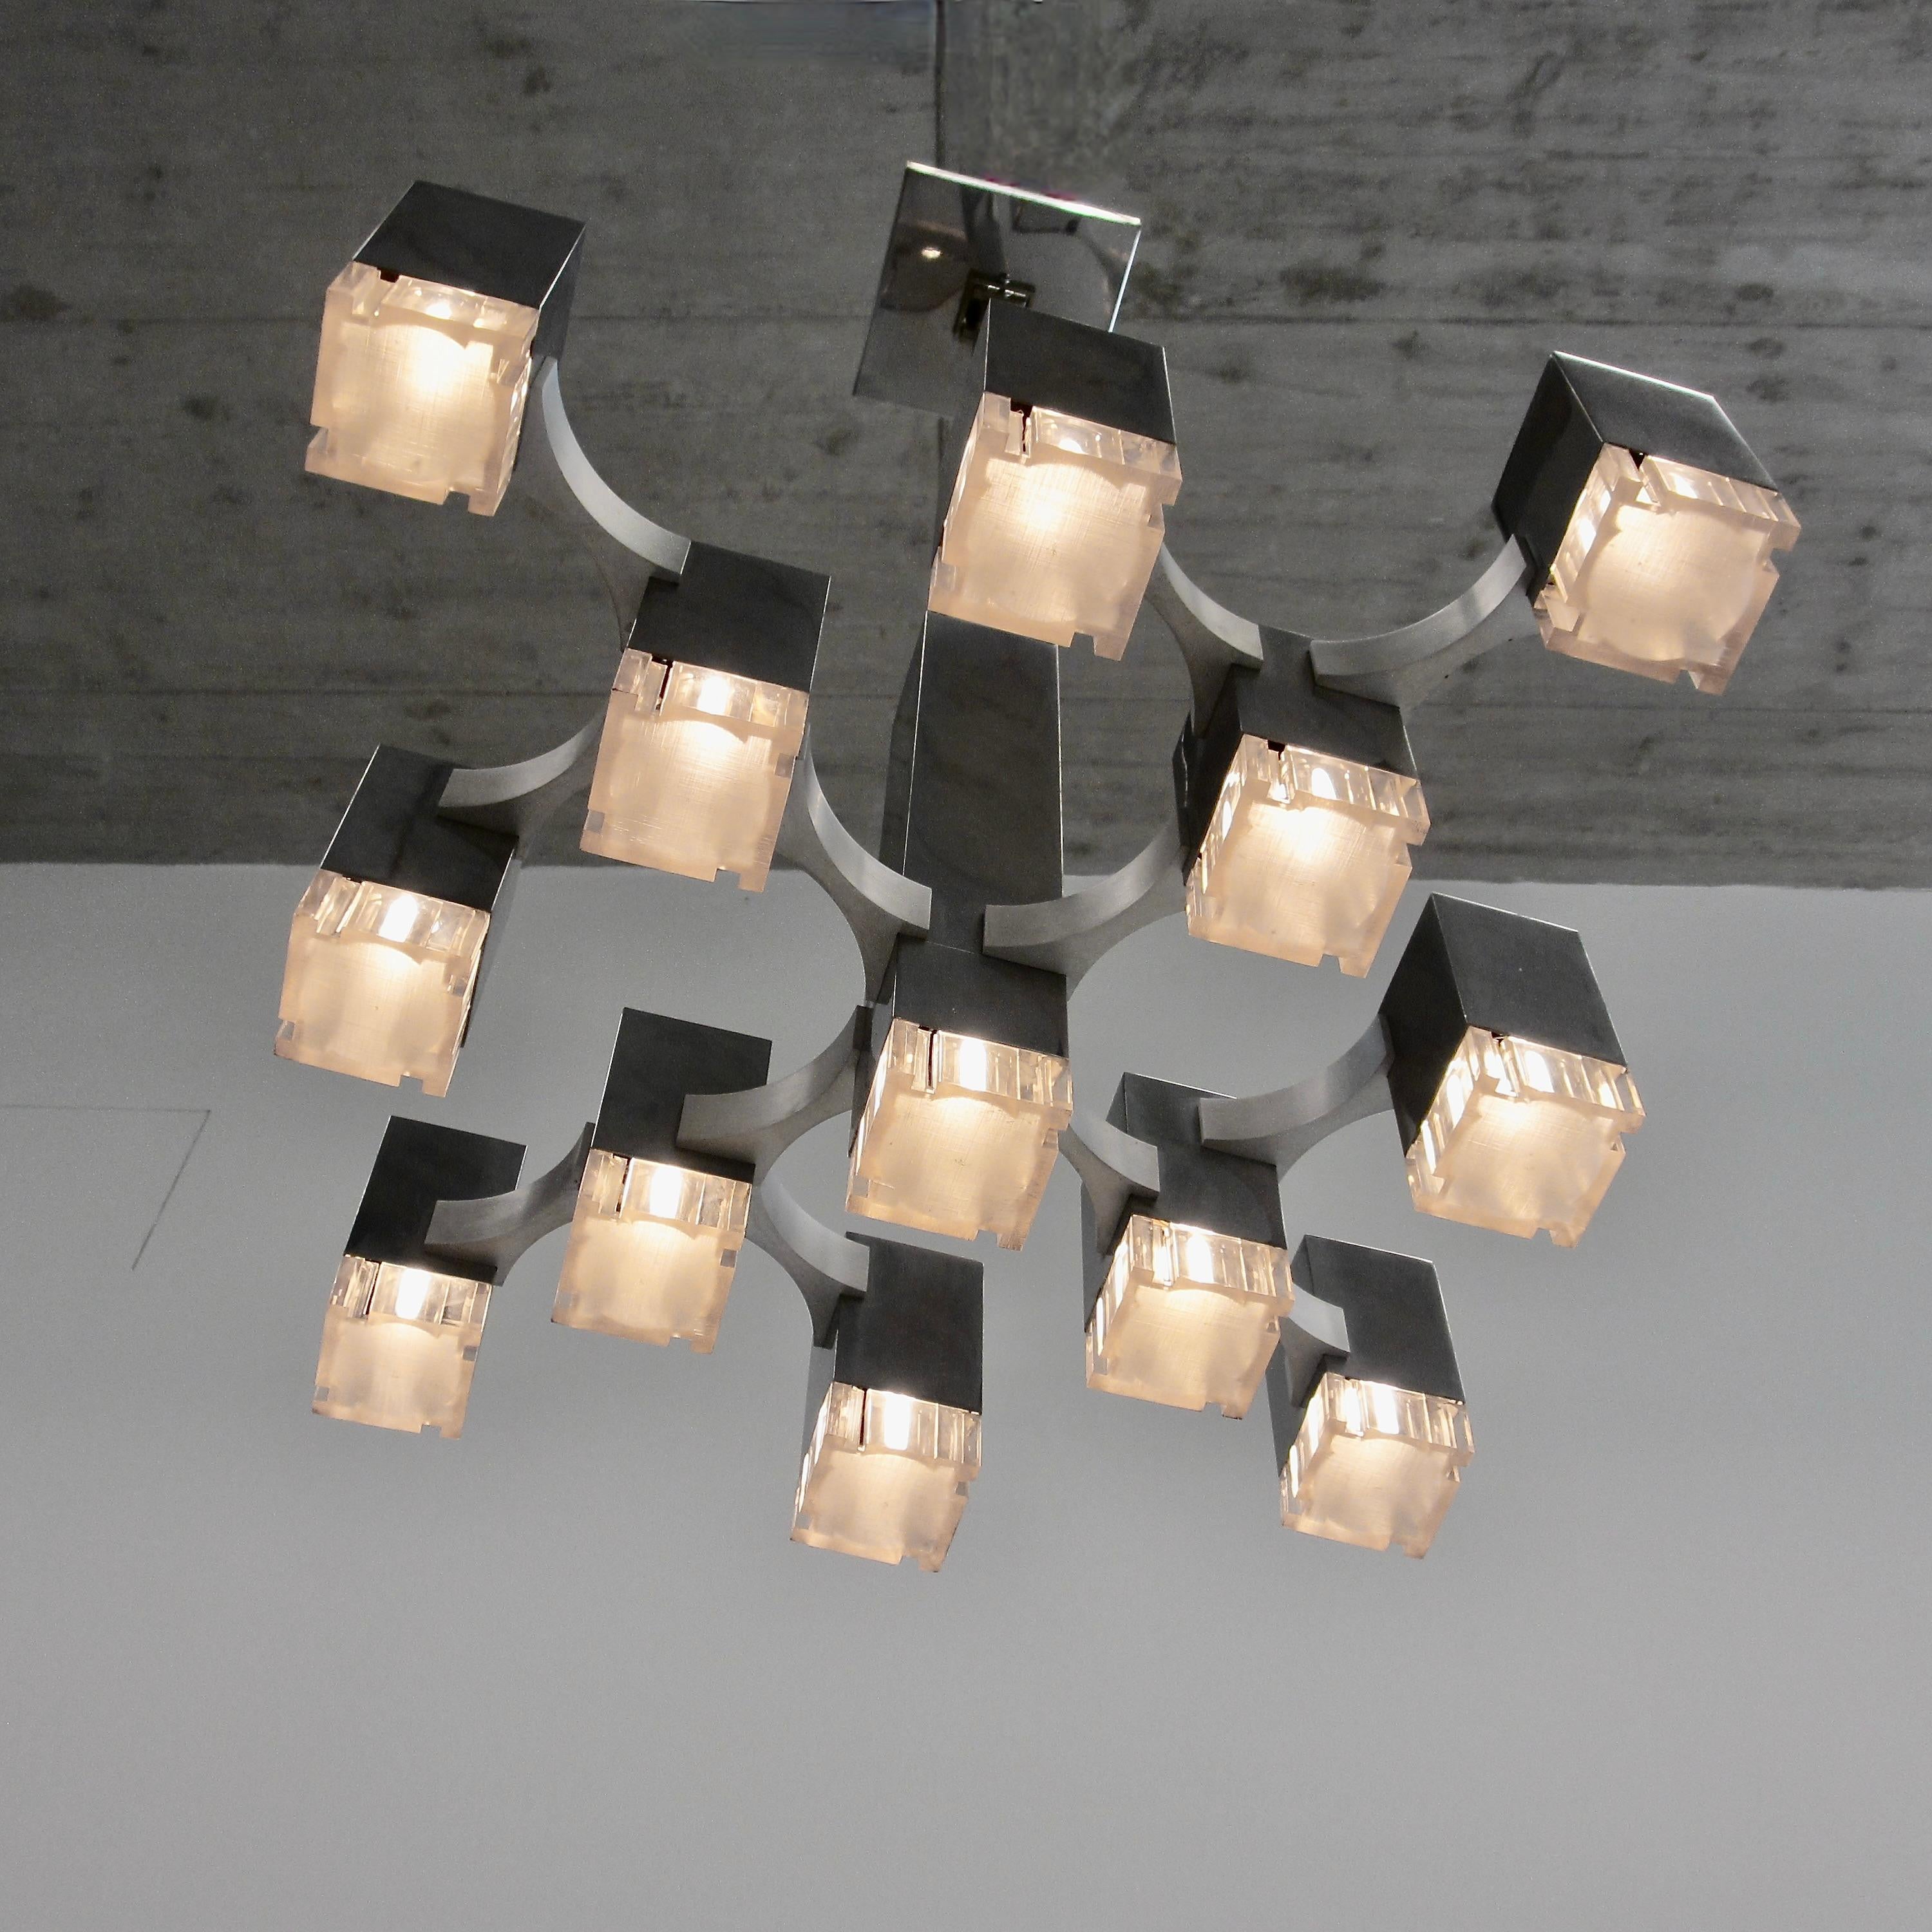 Early nickel plated ceiling light designed by Gaetano Sciolari. Italy, Sciolari, 1970s.

The CUBIC ceiling lamp with 13 light fittings, nickel-plated frame, plexiglass diffusers, designed and produced by Sciolari.

While the company 